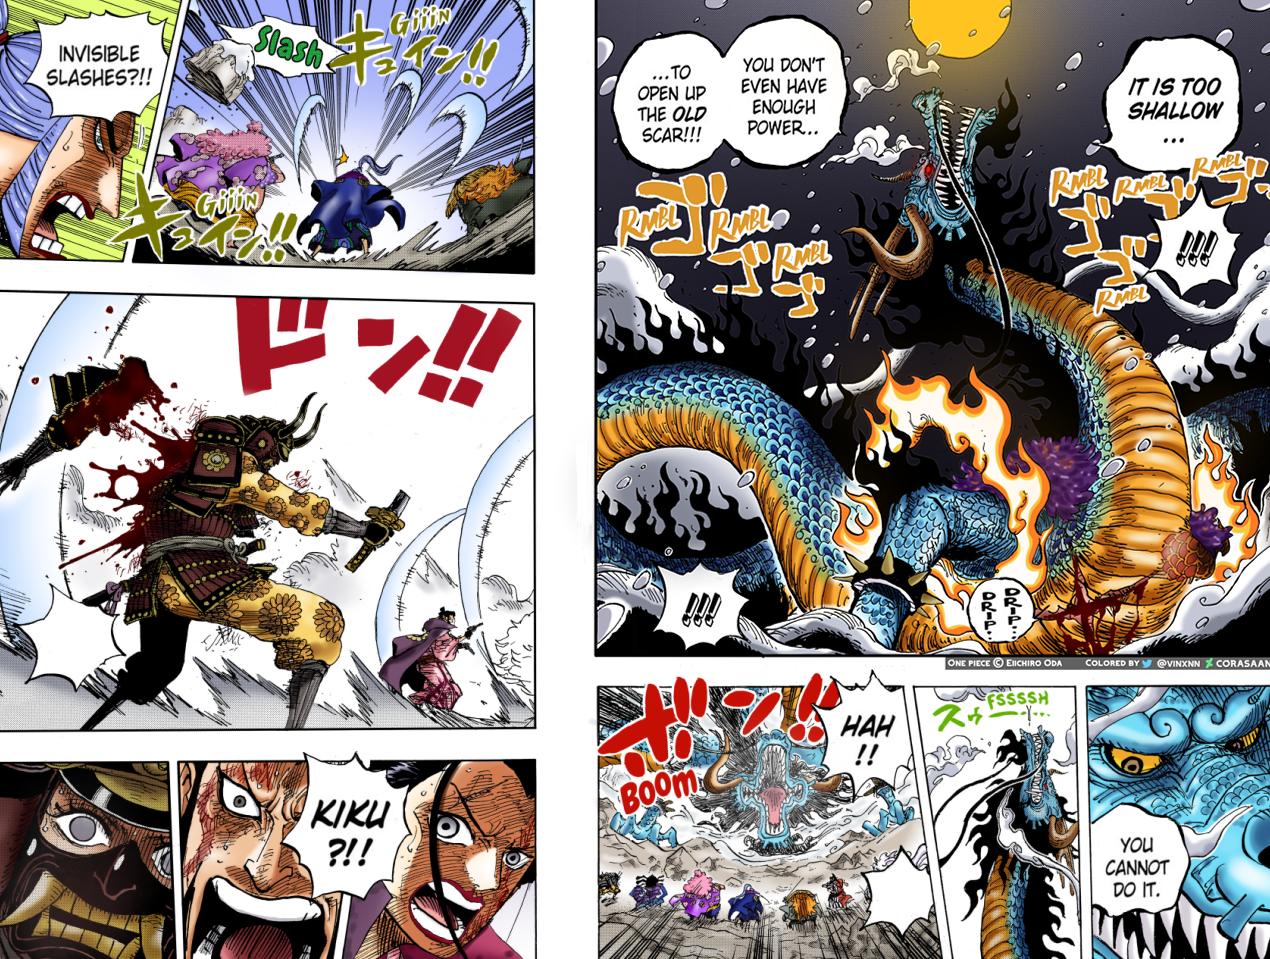 One piece 1044 colored version 1 by Borja2898 on DeviantArt